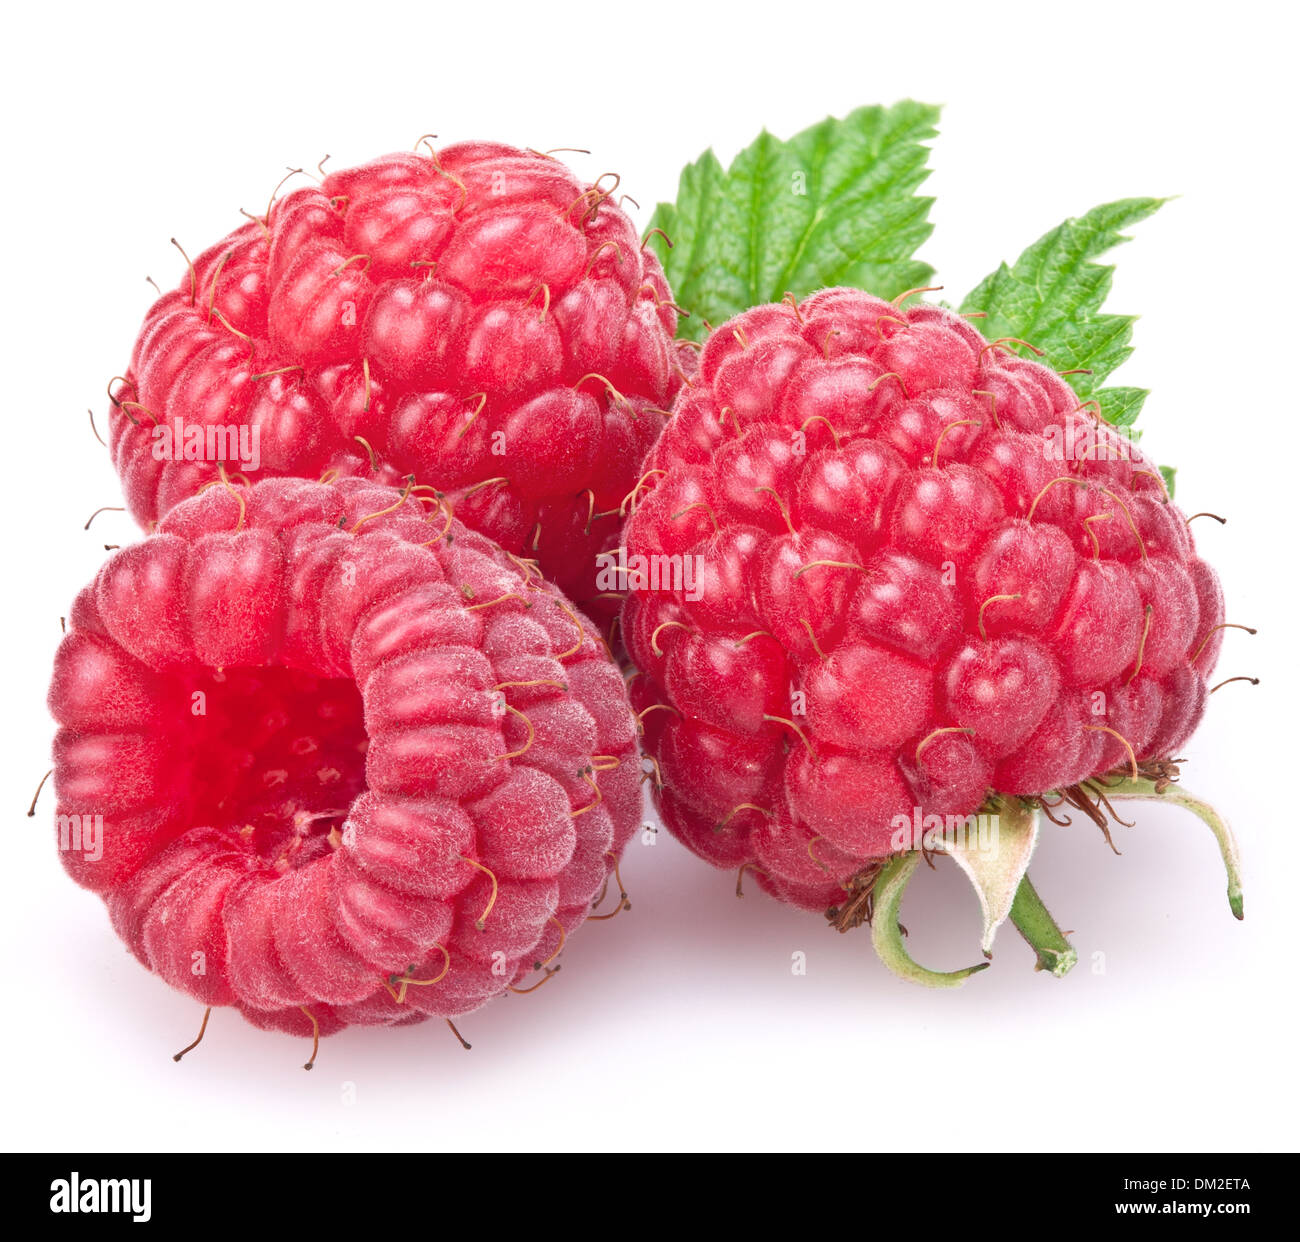 Raspberries with leaves isolated on a white background. Stock Photo